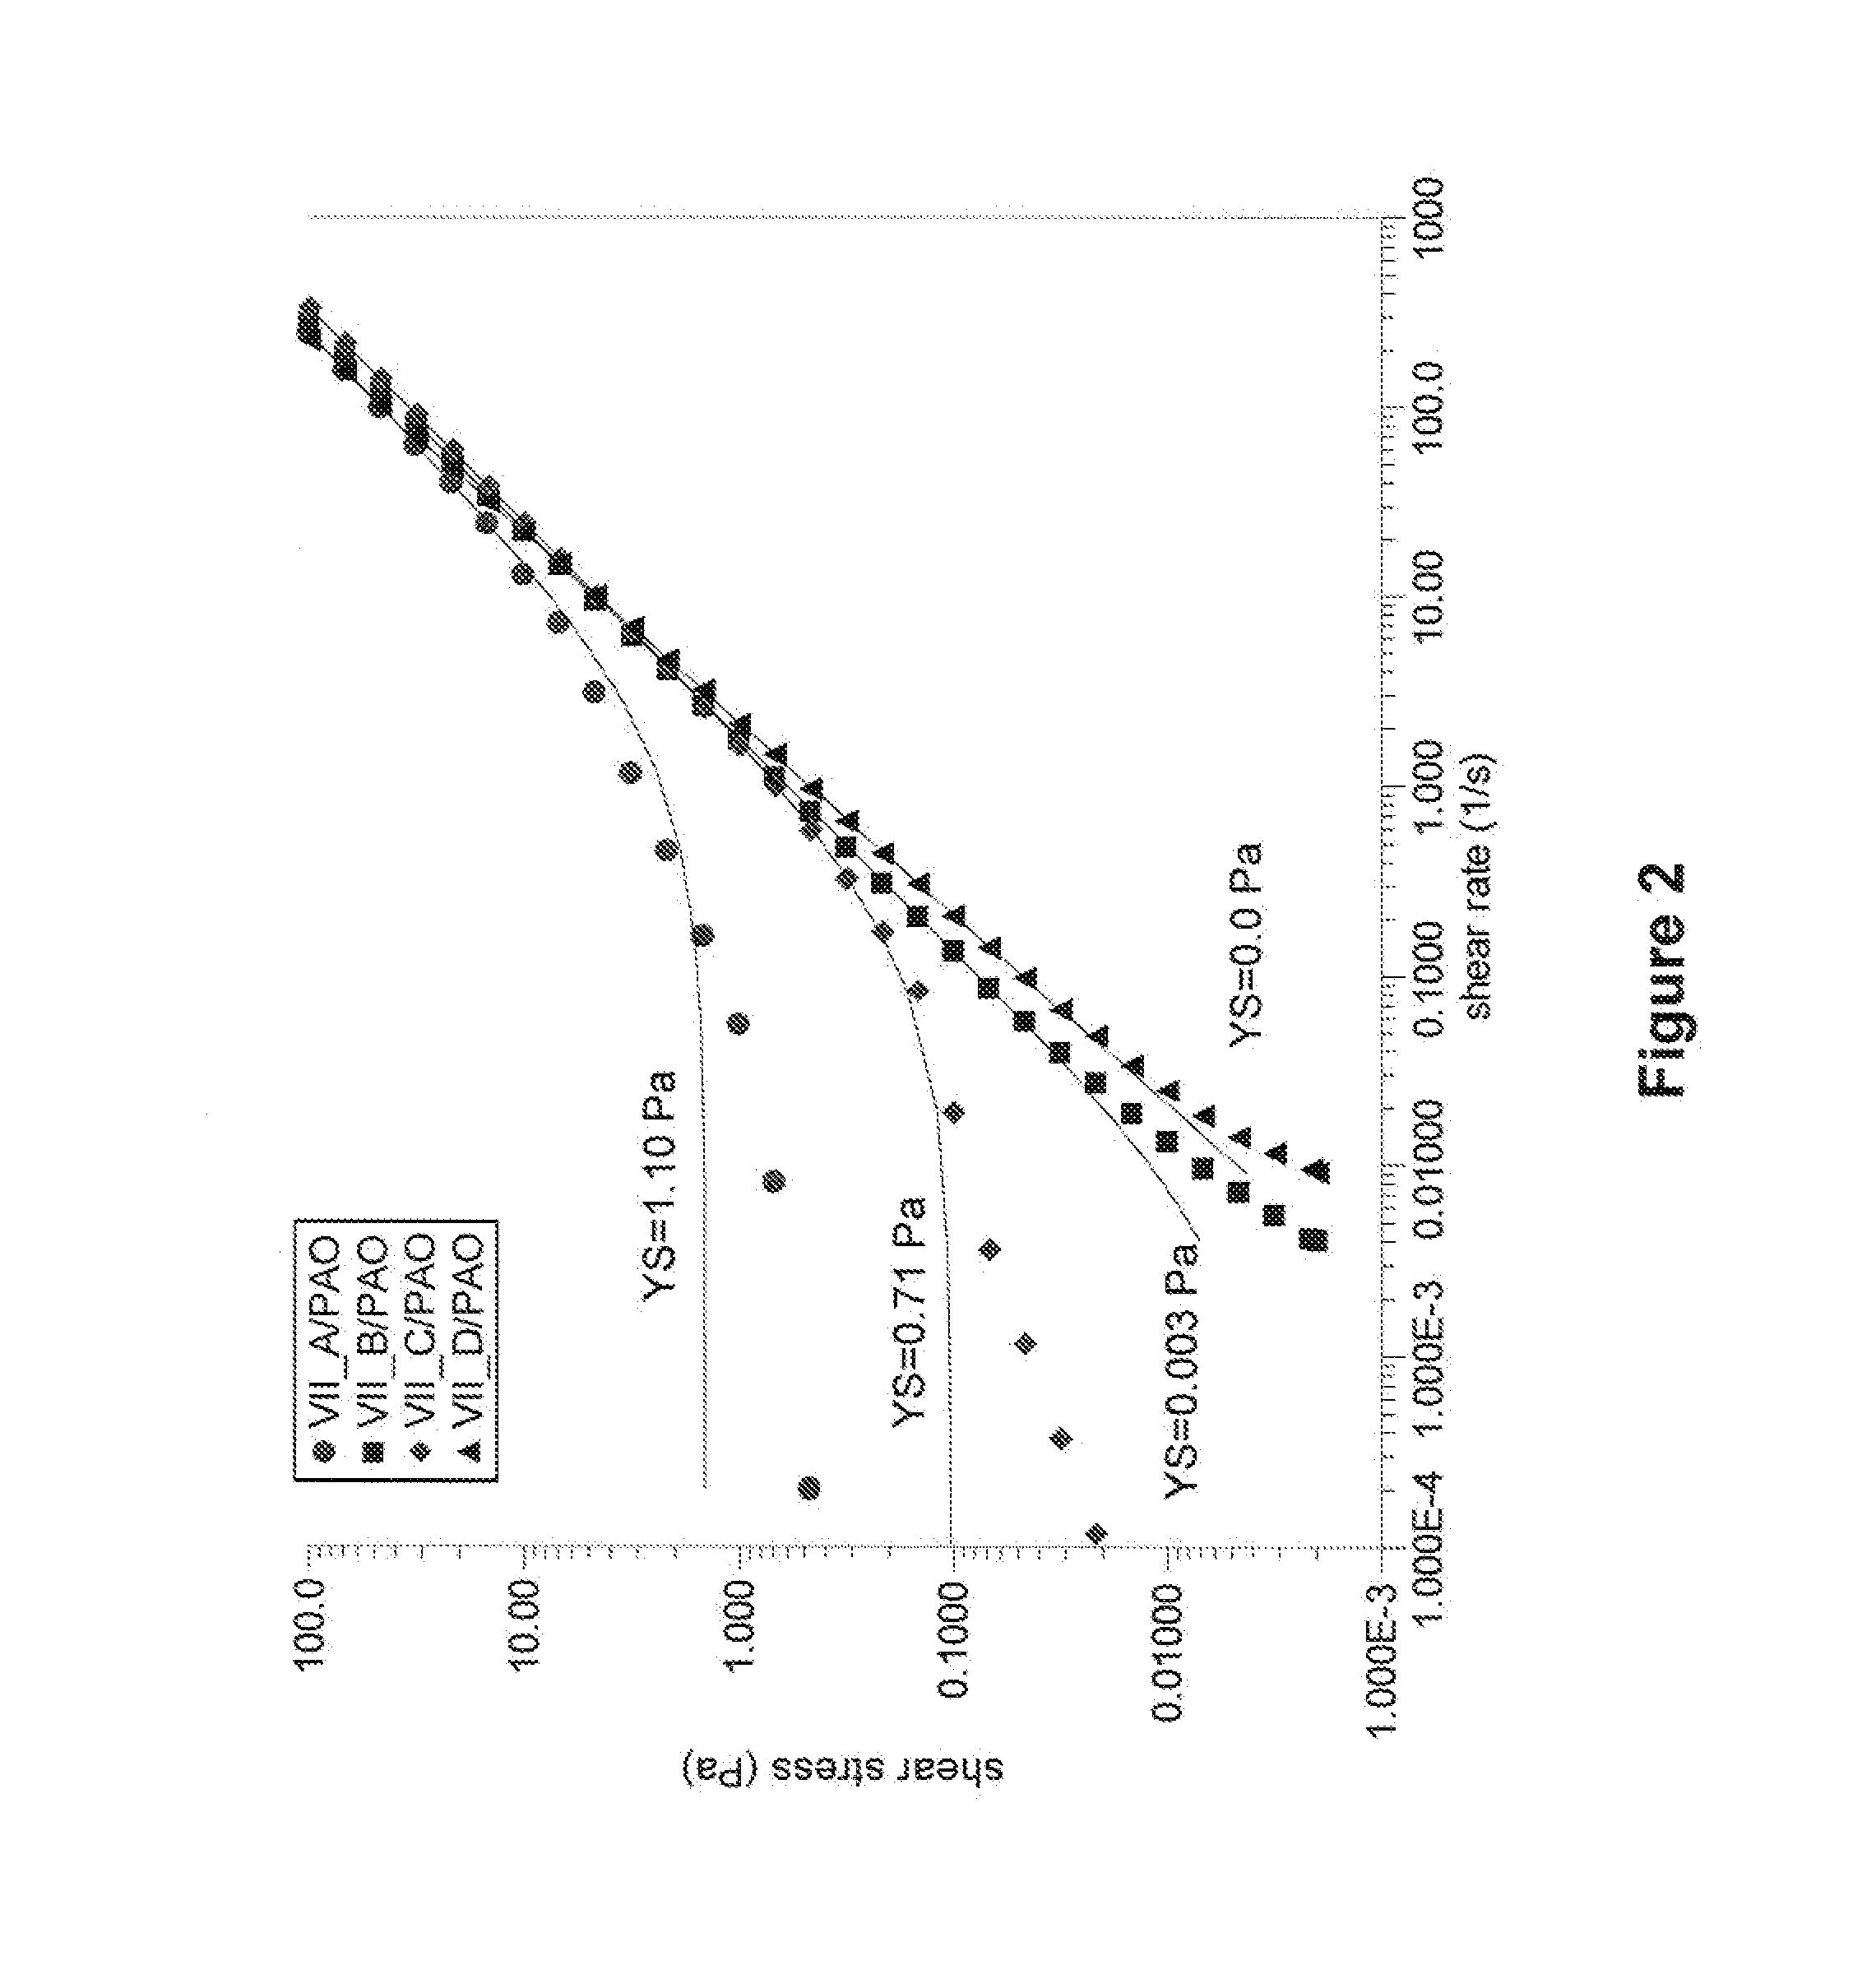 Rheological methods to determine the predisposition of a polymer to form network or gel